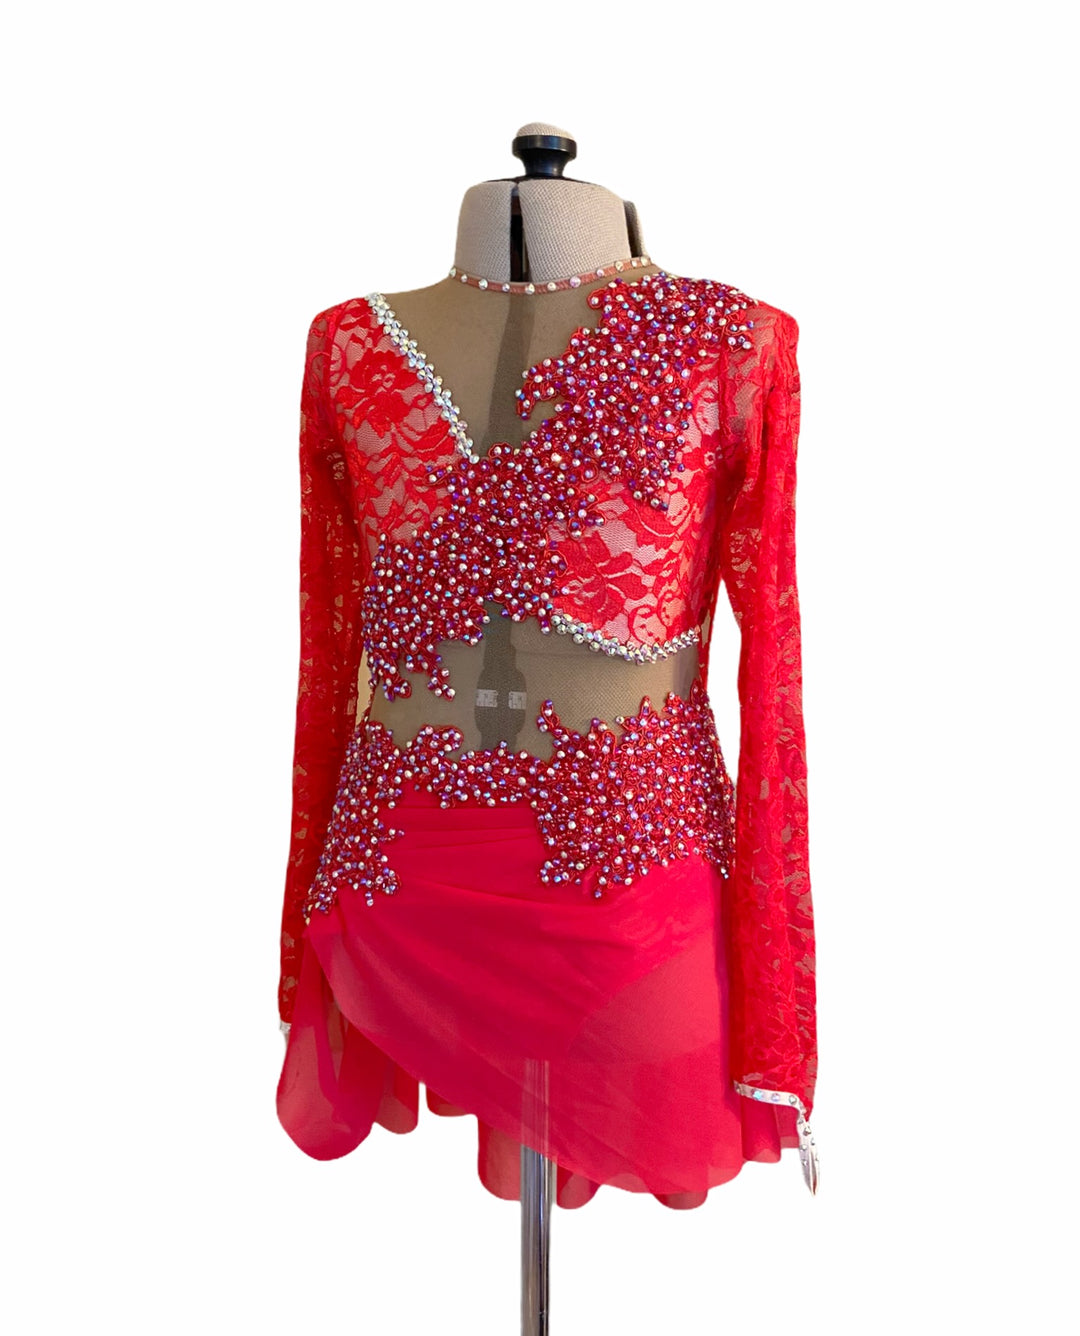 NEW CXL red ready-to-ship lyrical costume